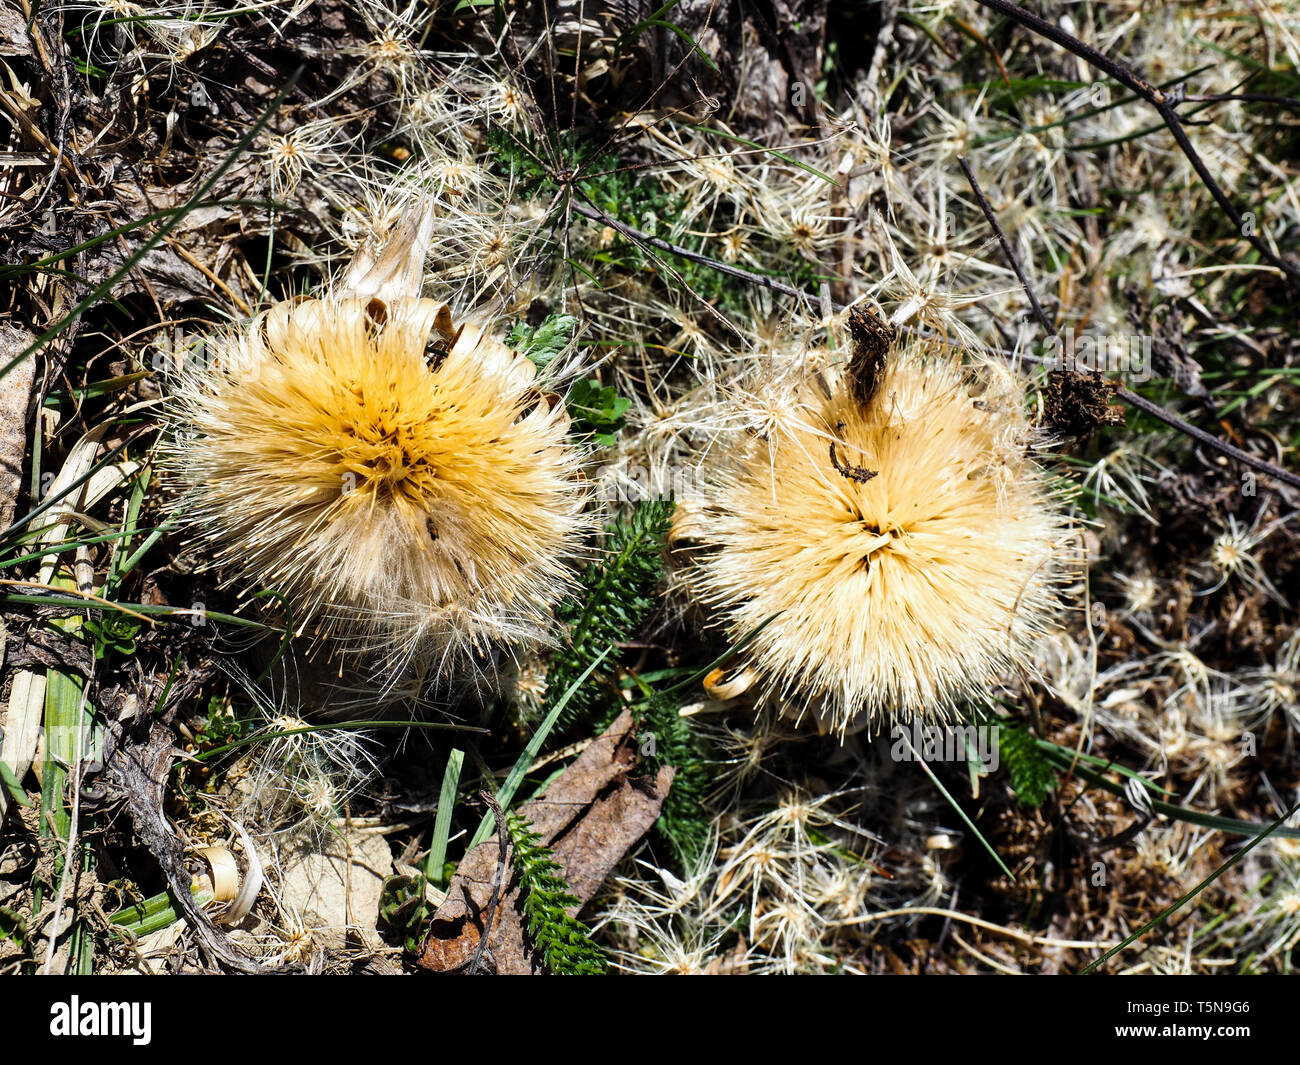 dry blossom flower of Carlina. Carlina is a genus of flowering plants in the aster family, Asteraceae. Stock Photo